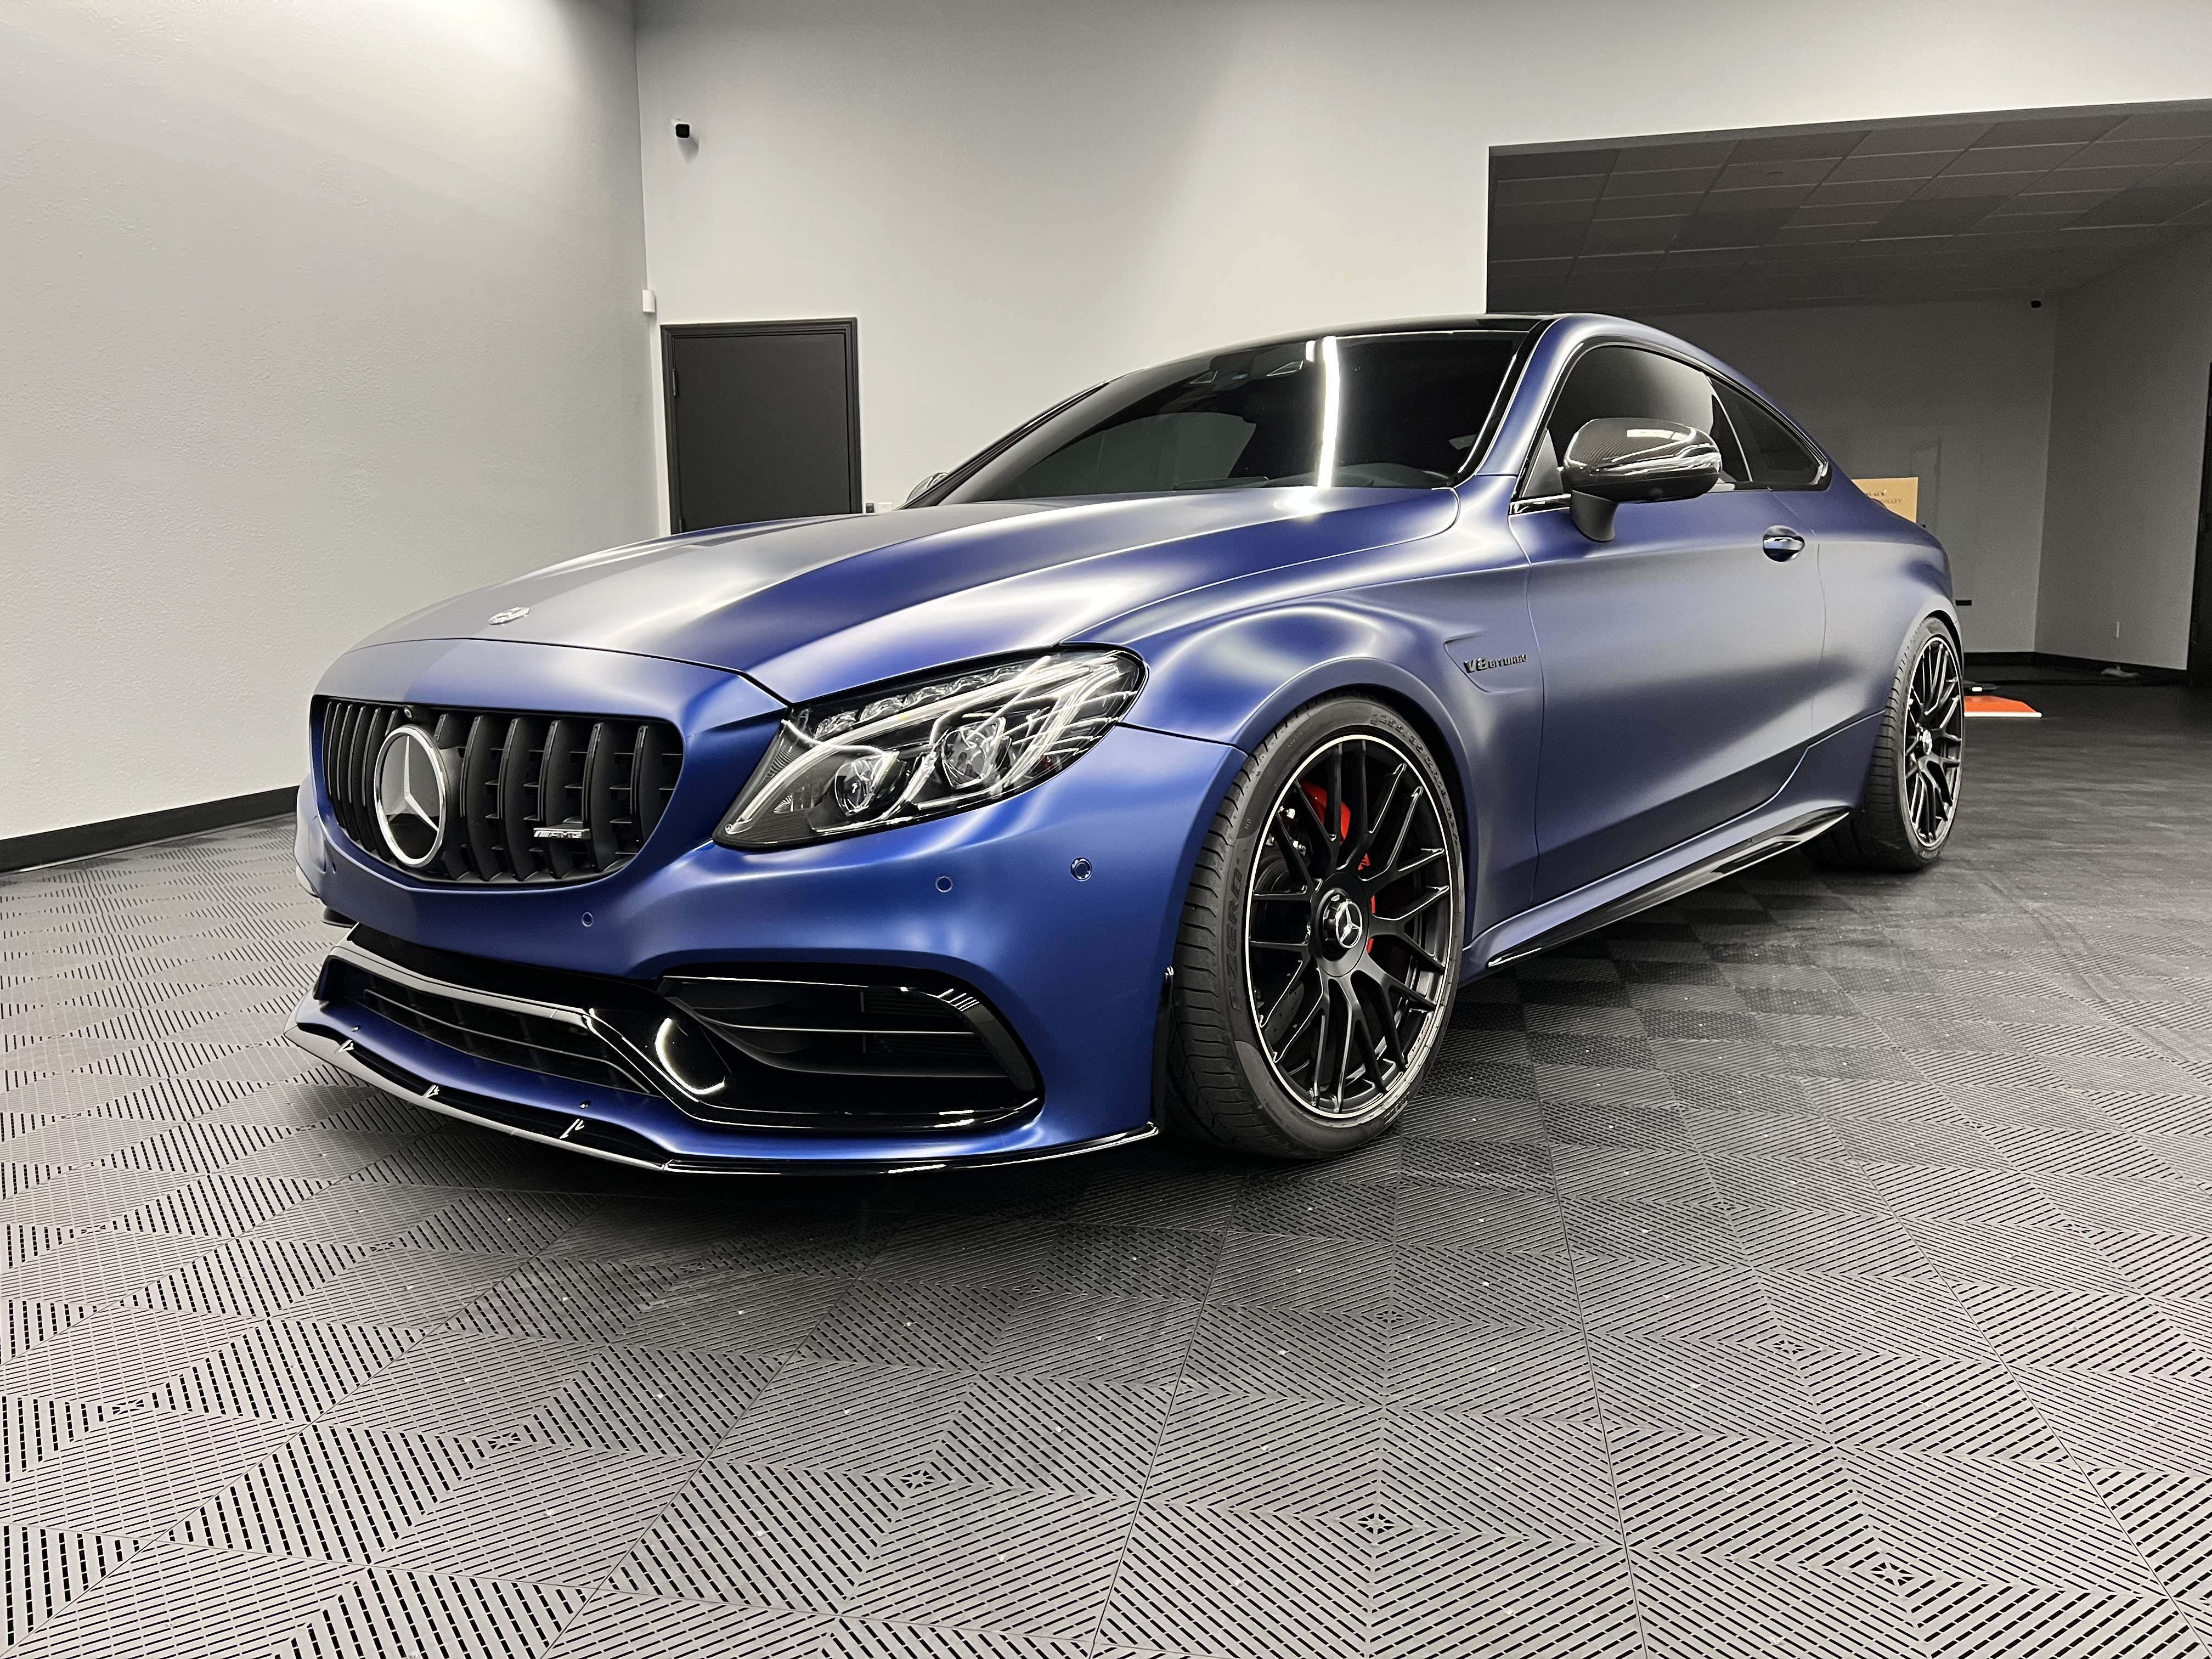 Used 2018 Mercedes-Benz C-Class AMG C 63 S For Sale (Sold)